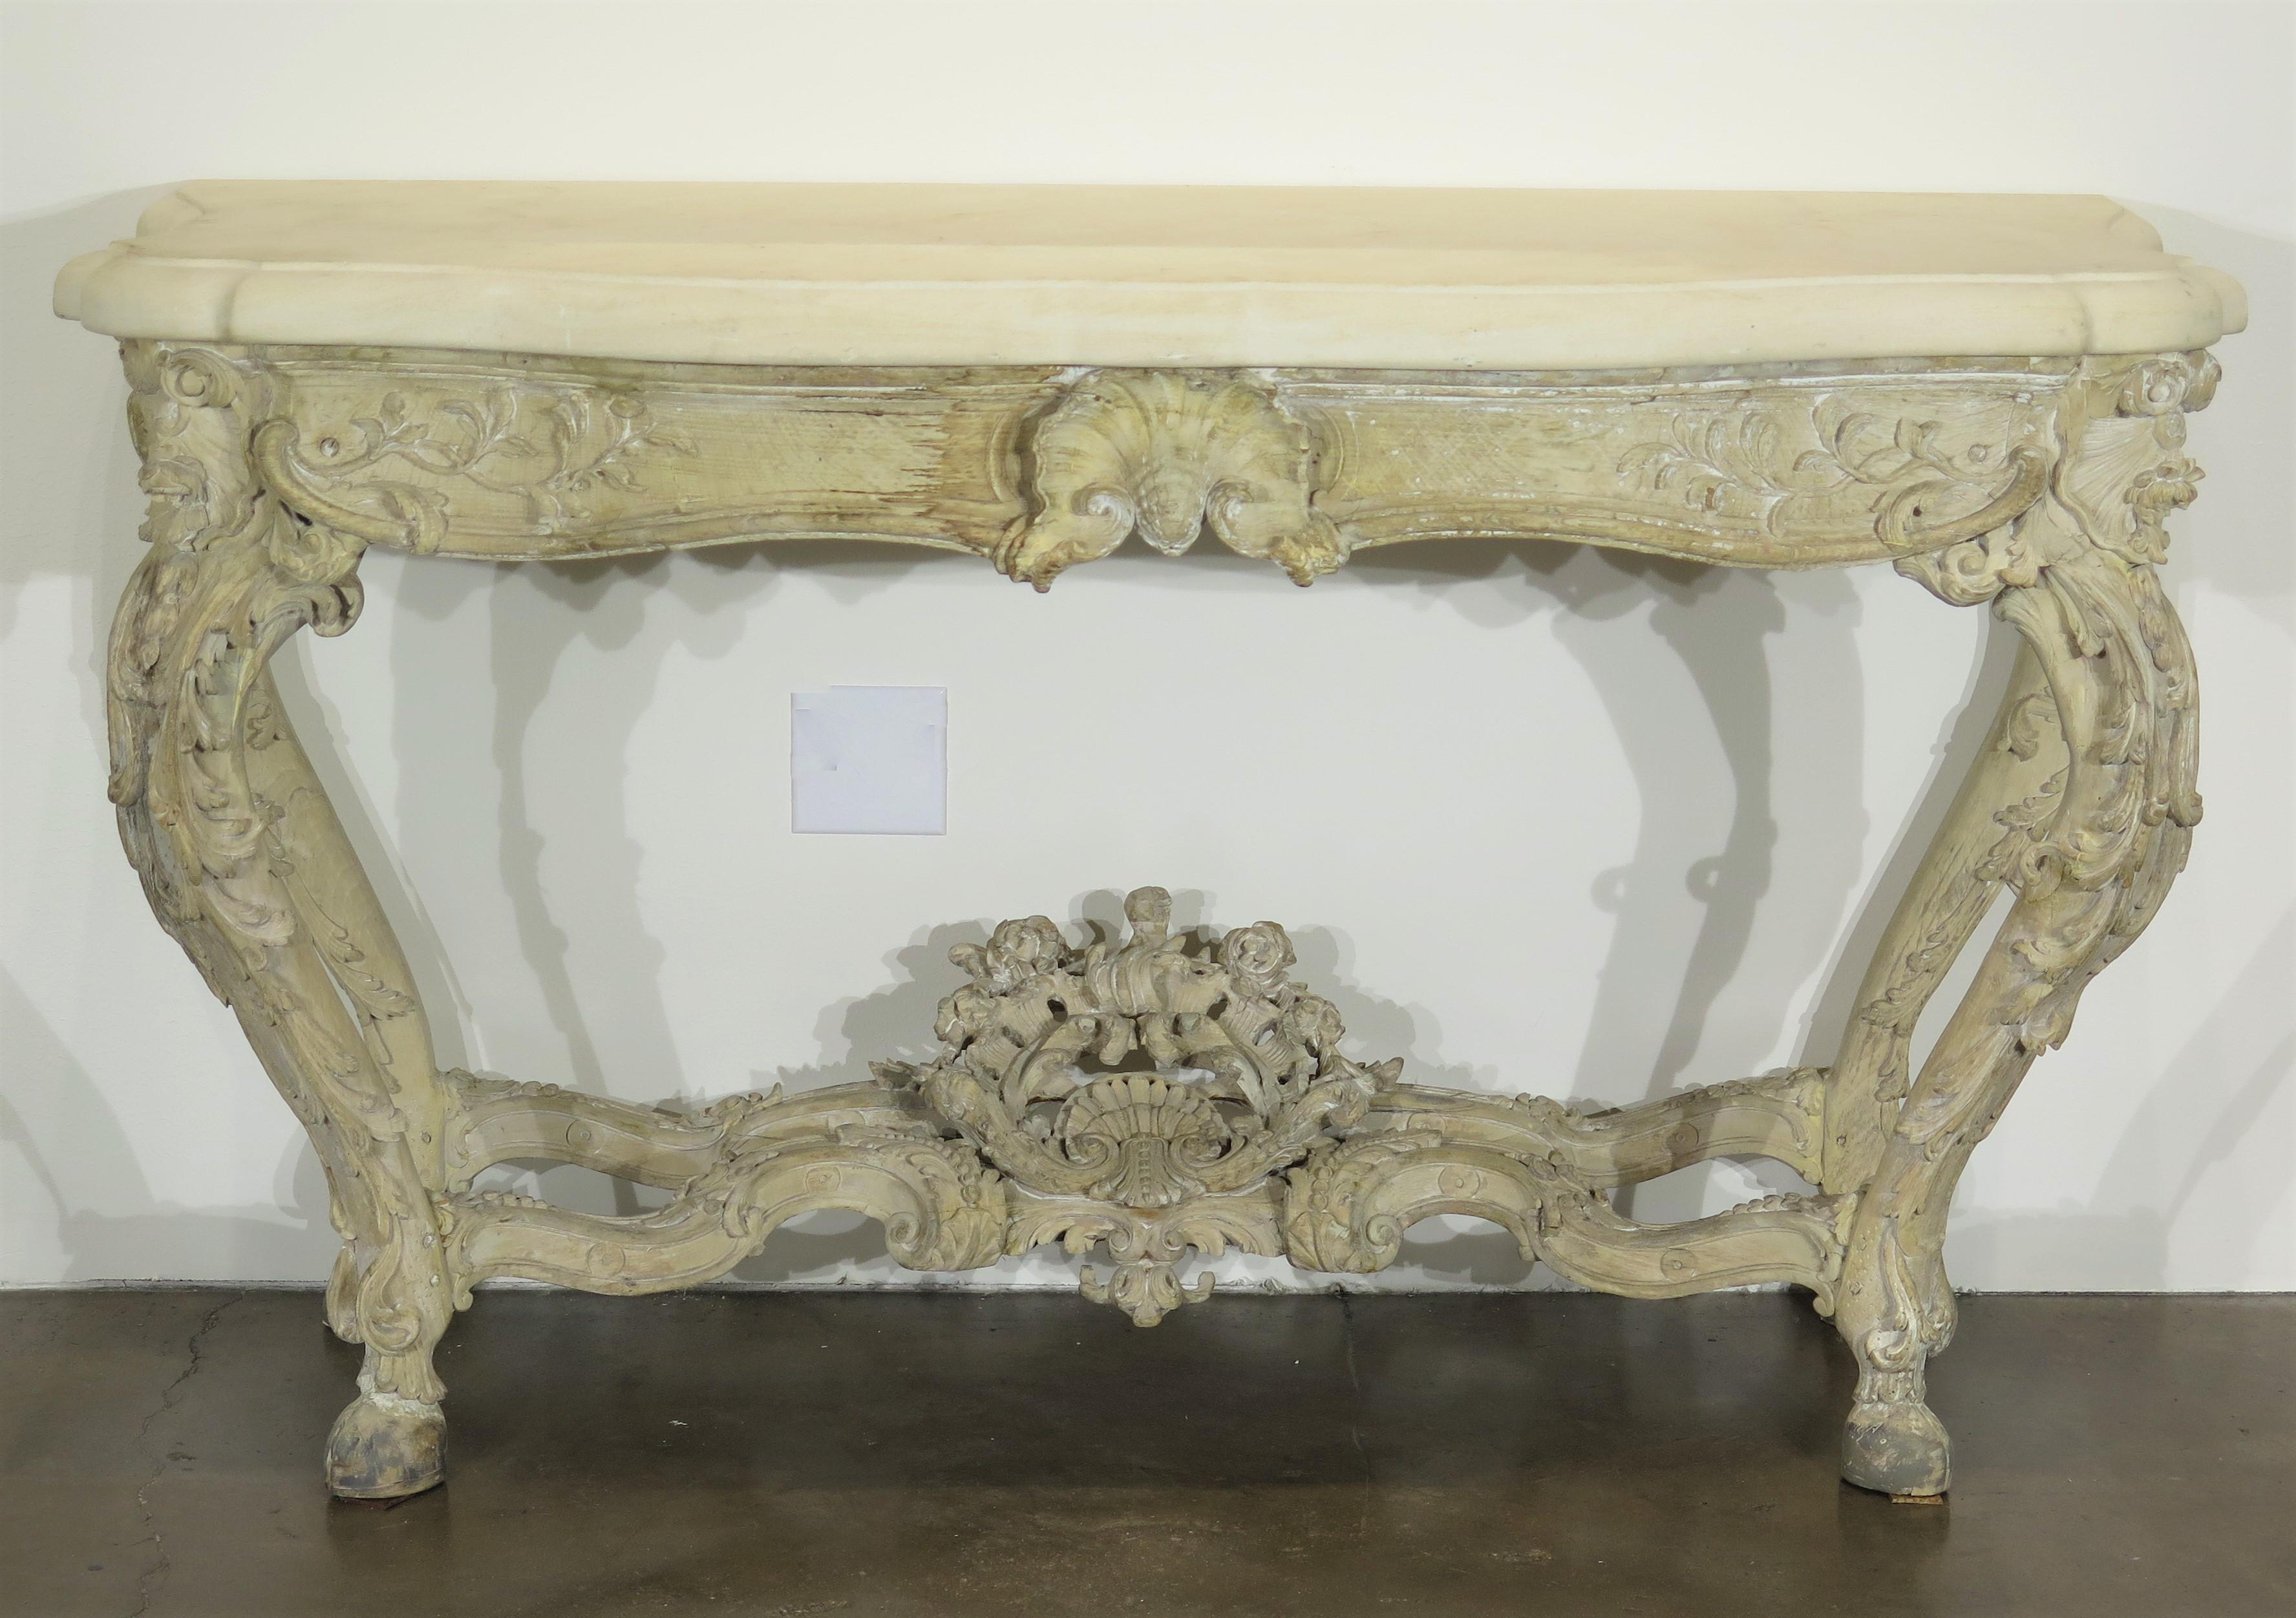 period Rococo / Louis XV large scale / grand elaborately carved and painted console table with swirls, leaves, and shells, cabriole legs with cloven hoof feet, shaped limestone top (added later), French. 18th century, circa 1730 